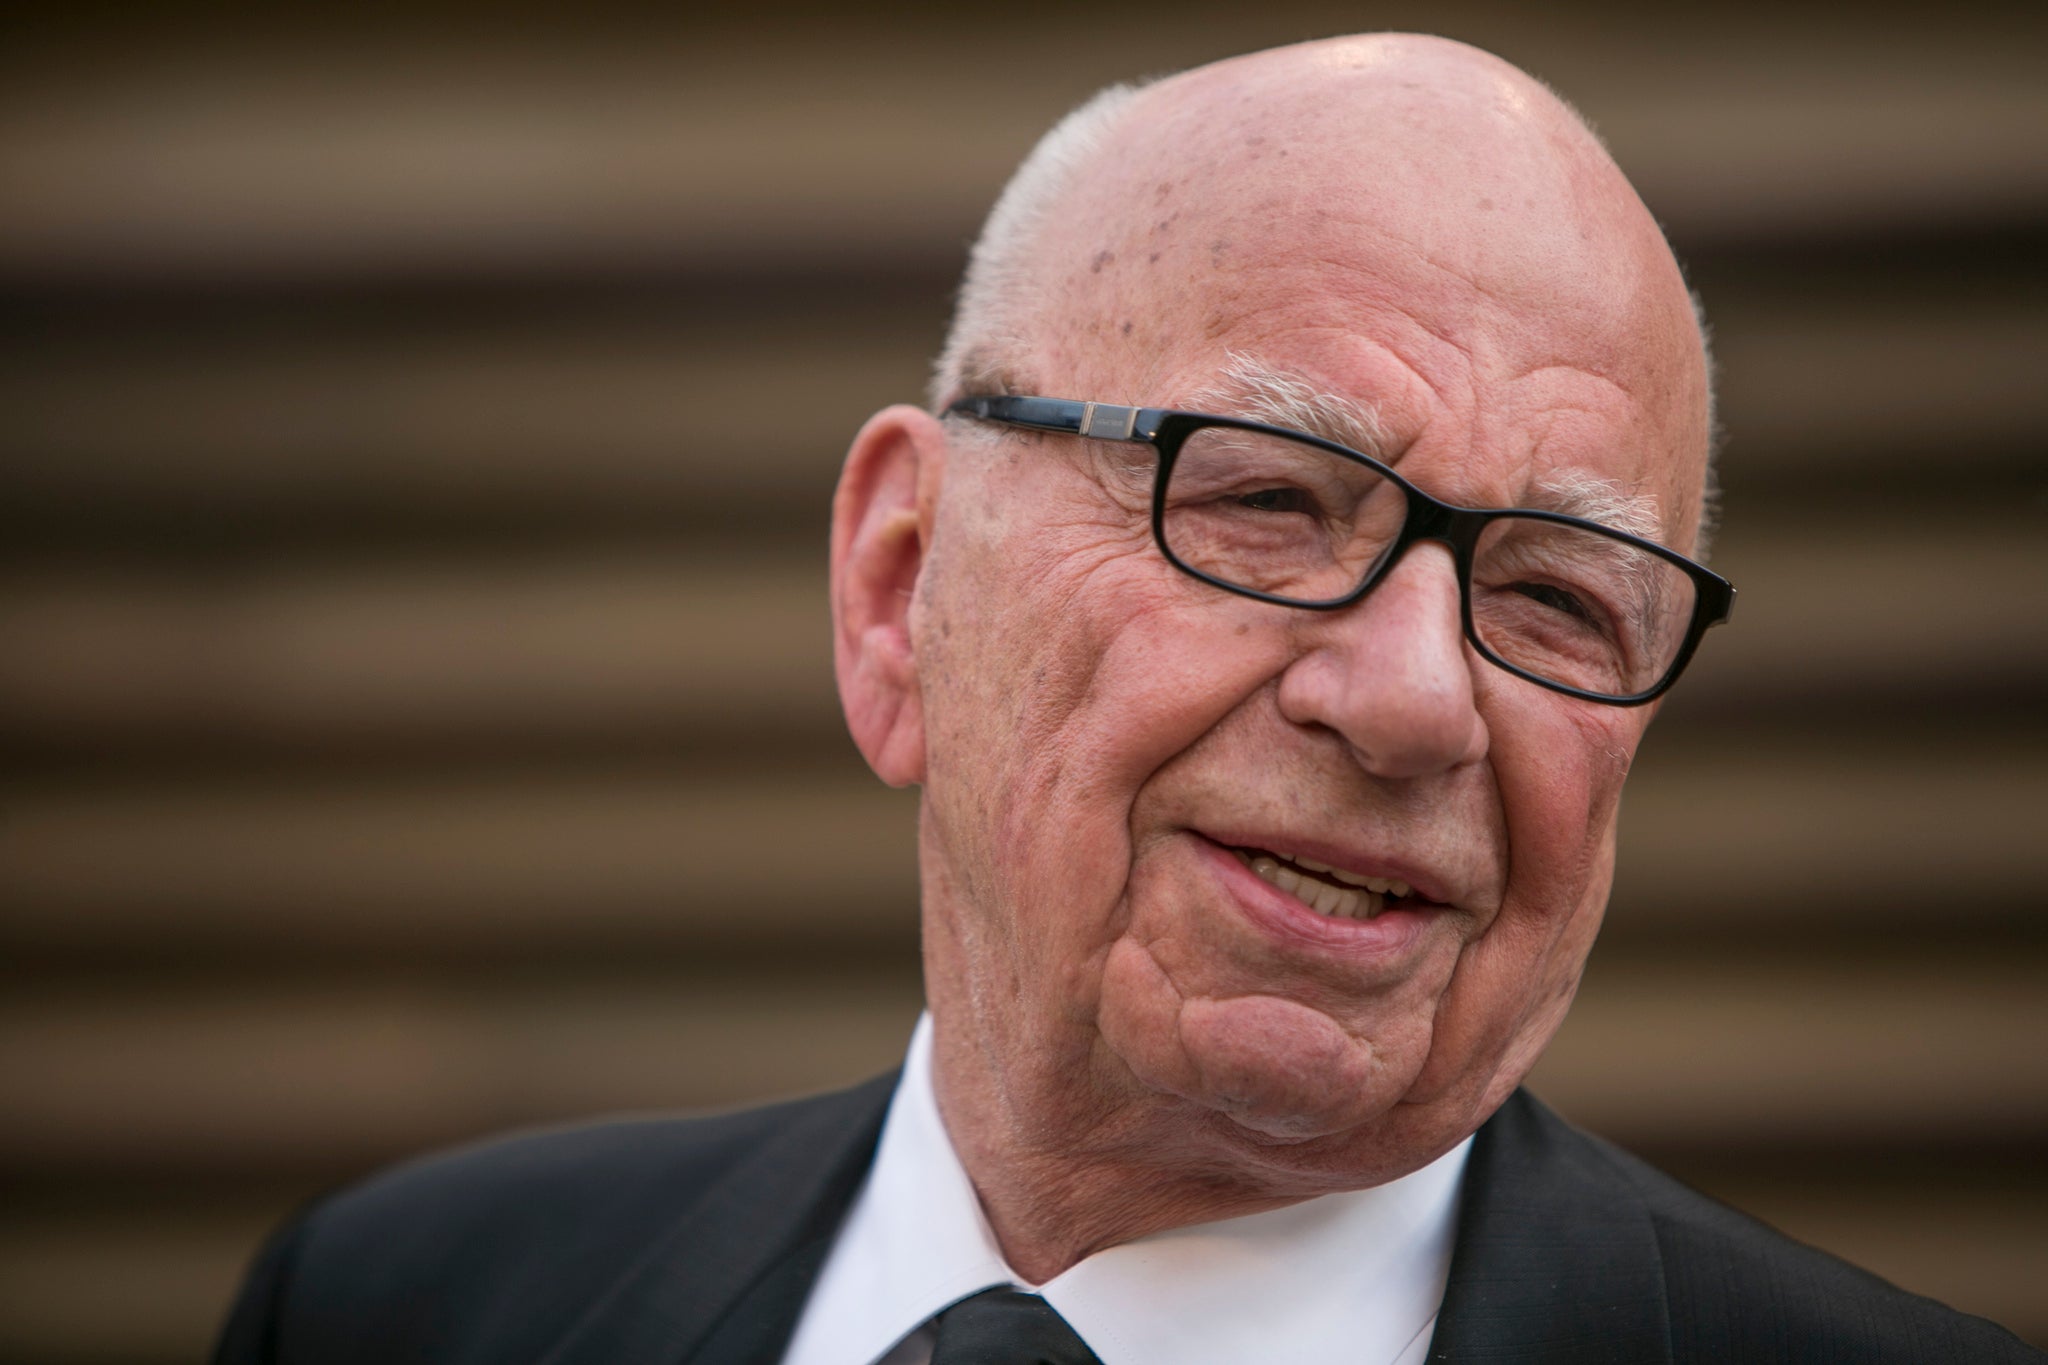 Rupert Murdoch said Time Warner 'refused to engage' with 21st Century Fox